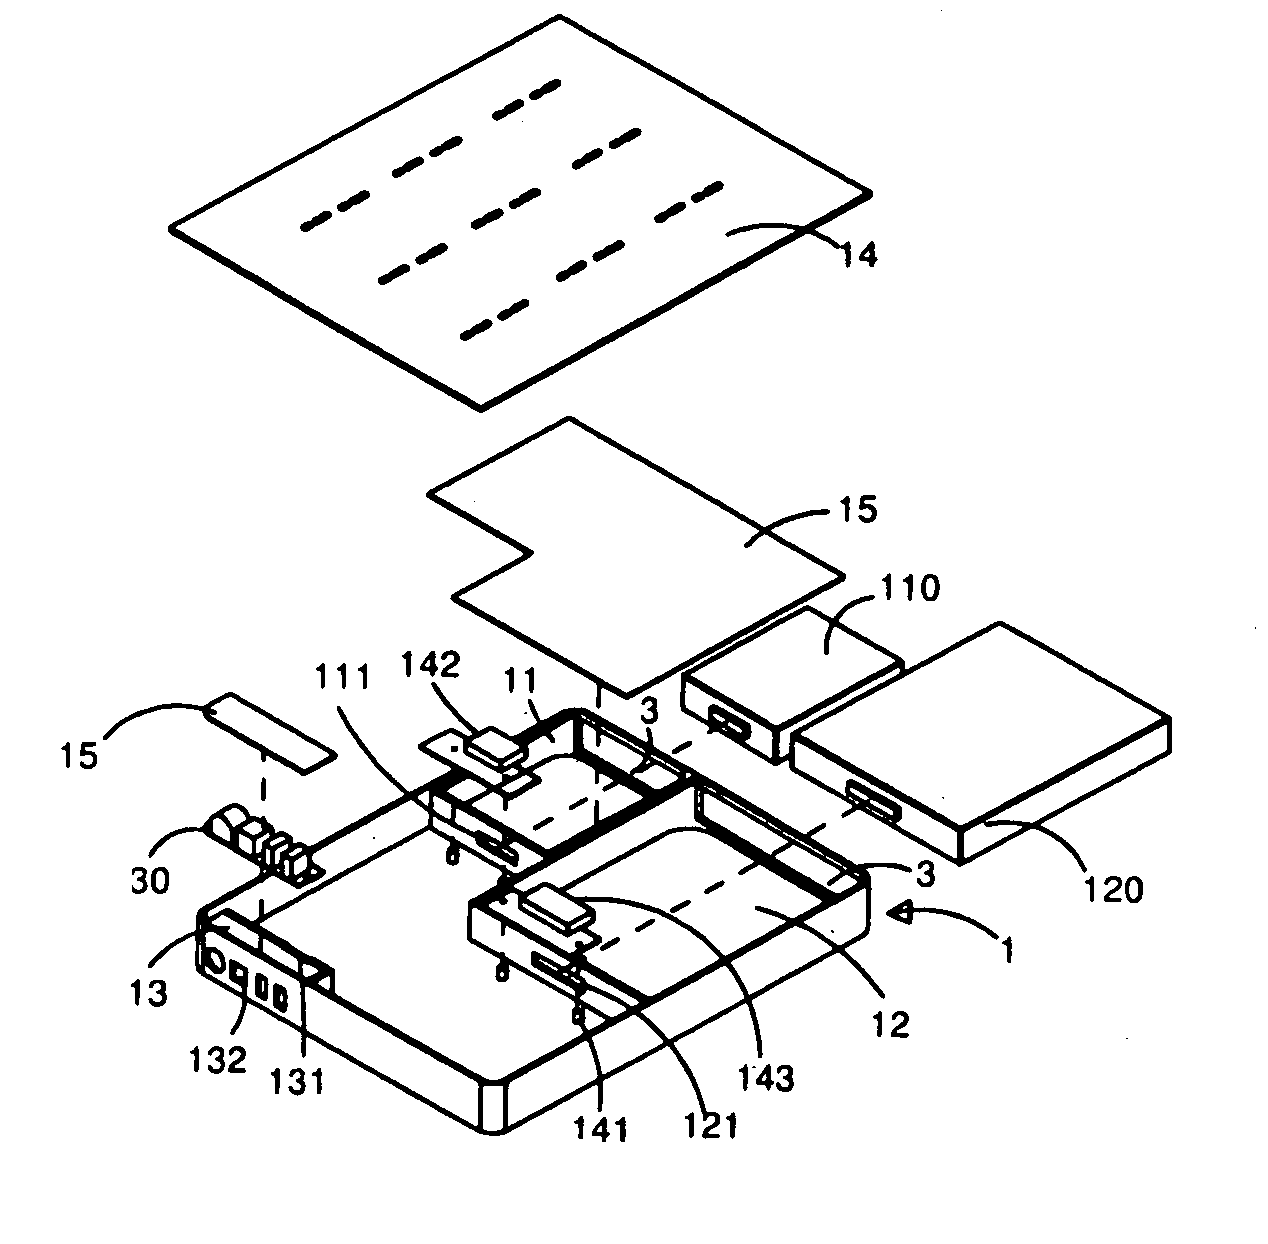 Waterproof casing with multiple isolated compartments